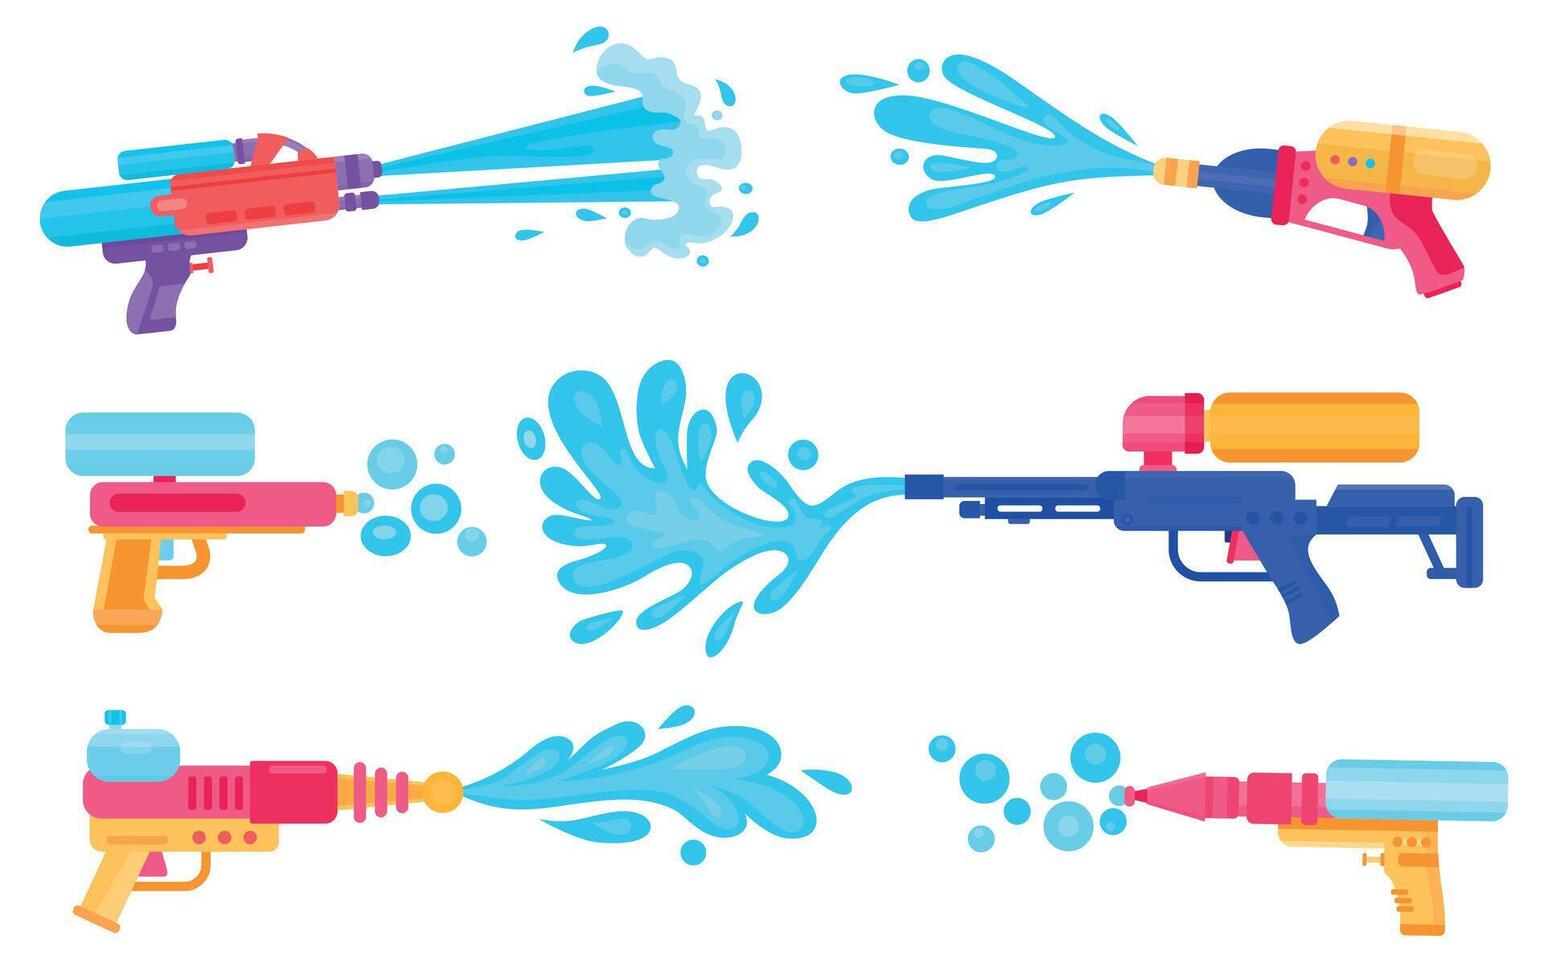 Toy guns spraying water for summer games and songkran festival. Cartoon kids pistols with liquid splashes. Thailand water party vector set